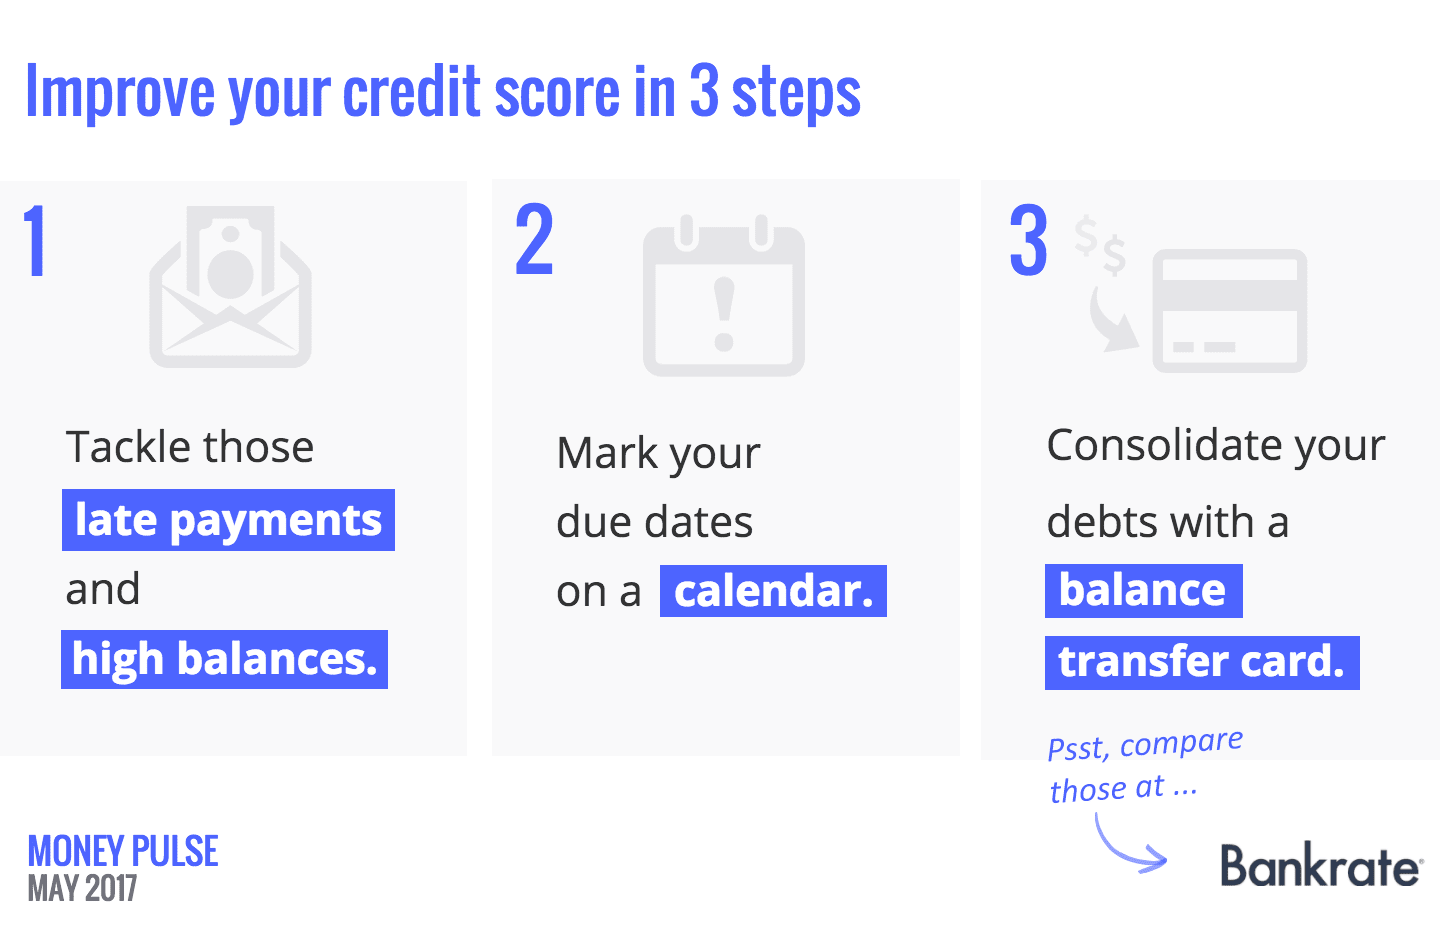 Improve your credit score in 3 steps